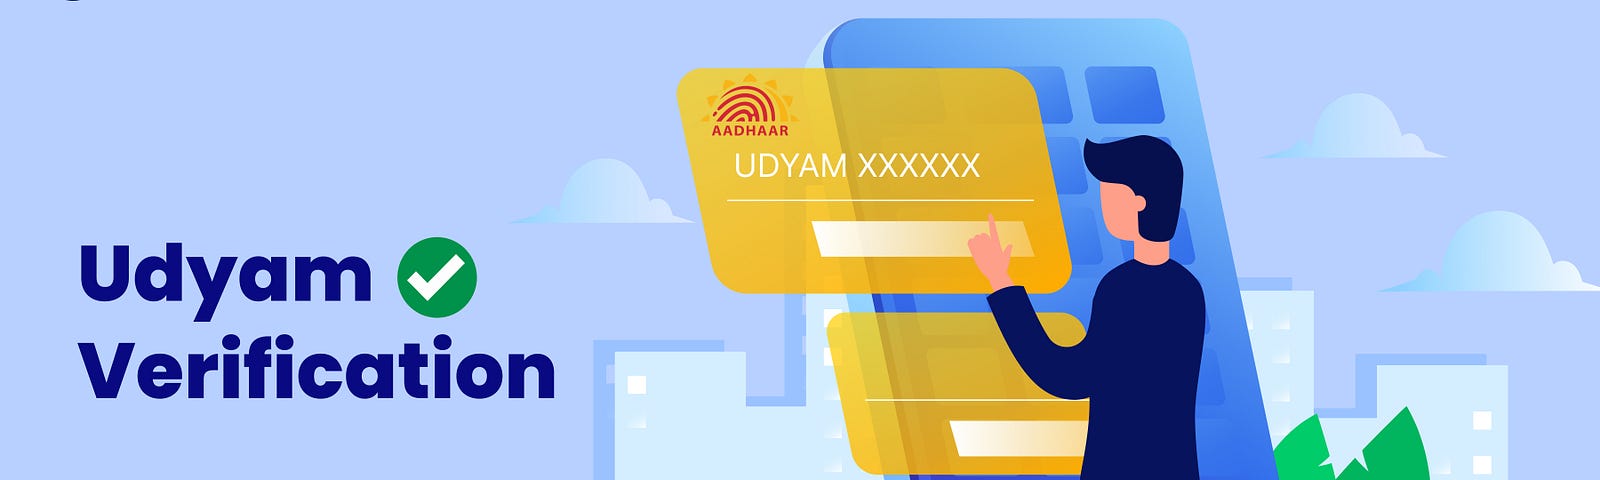 What is Udhyam Verification? Udhyam Verification is a crucial process mandated by the Government of India for Micro, Small, and Medium Enterprises (MSMEs) seeking registration under the udhyam Registration portal. It serves as a means to validate the authenticity and eligibility of MSMEs for various schemes, incentives, and benefits provided by the government. Essentially, Udhyam Verification verifies the details provided by MSMEs during the registration process to ensure compliance with the pre